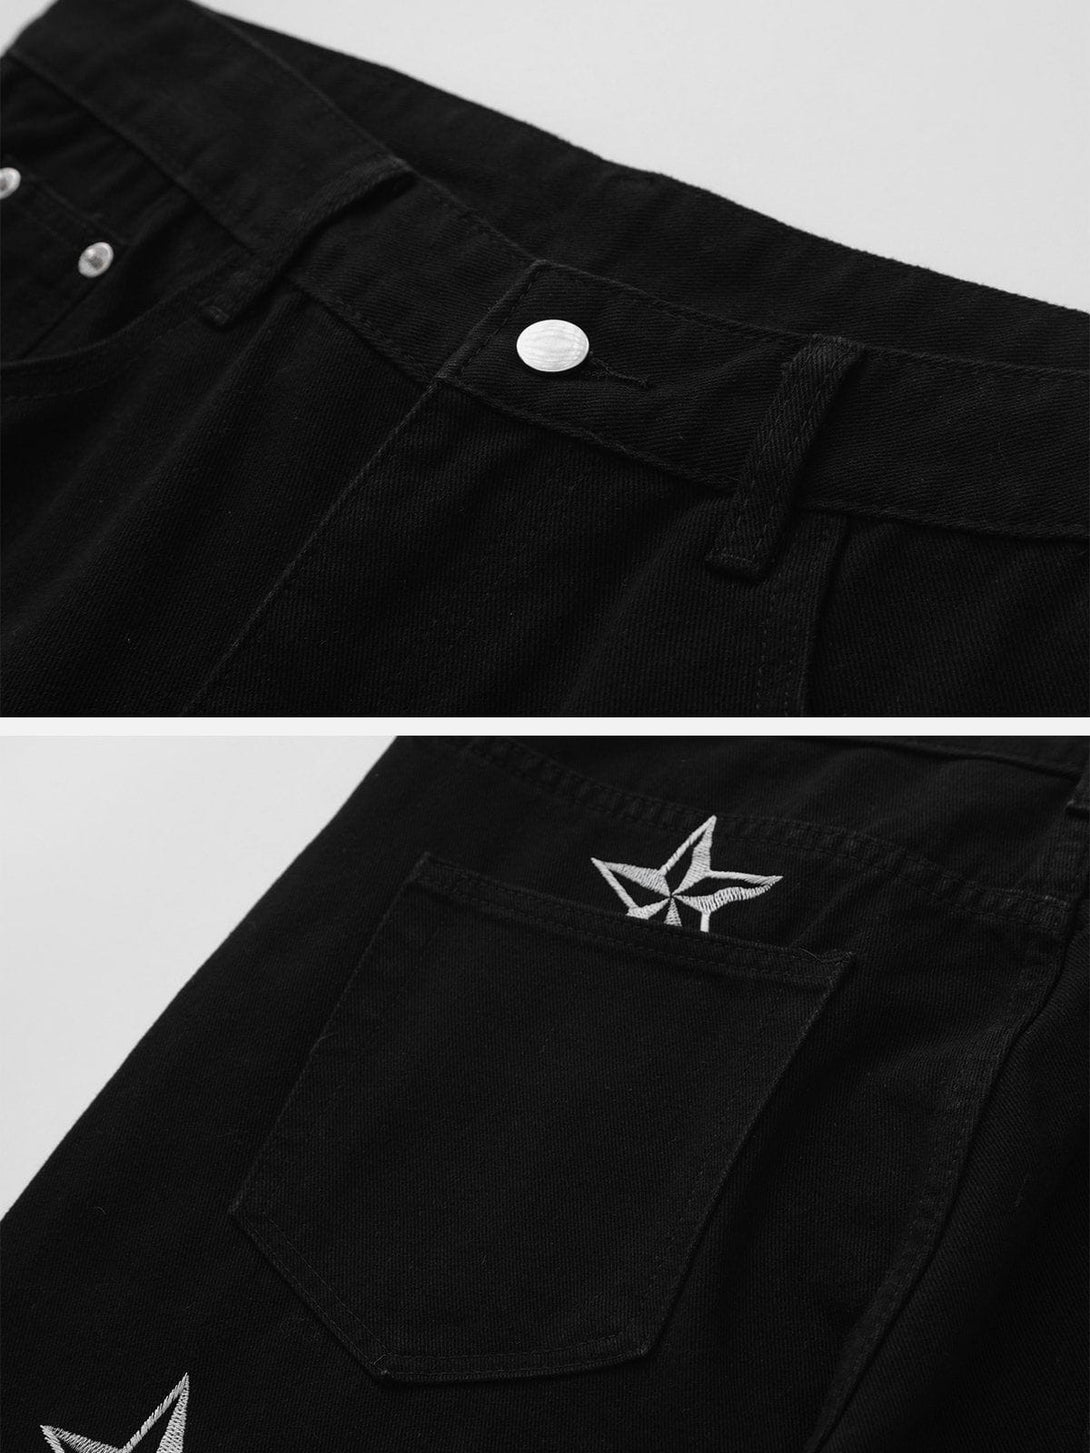 Levefly - Embroidered Star Jeans - Streetwear Fashion - levefly.com